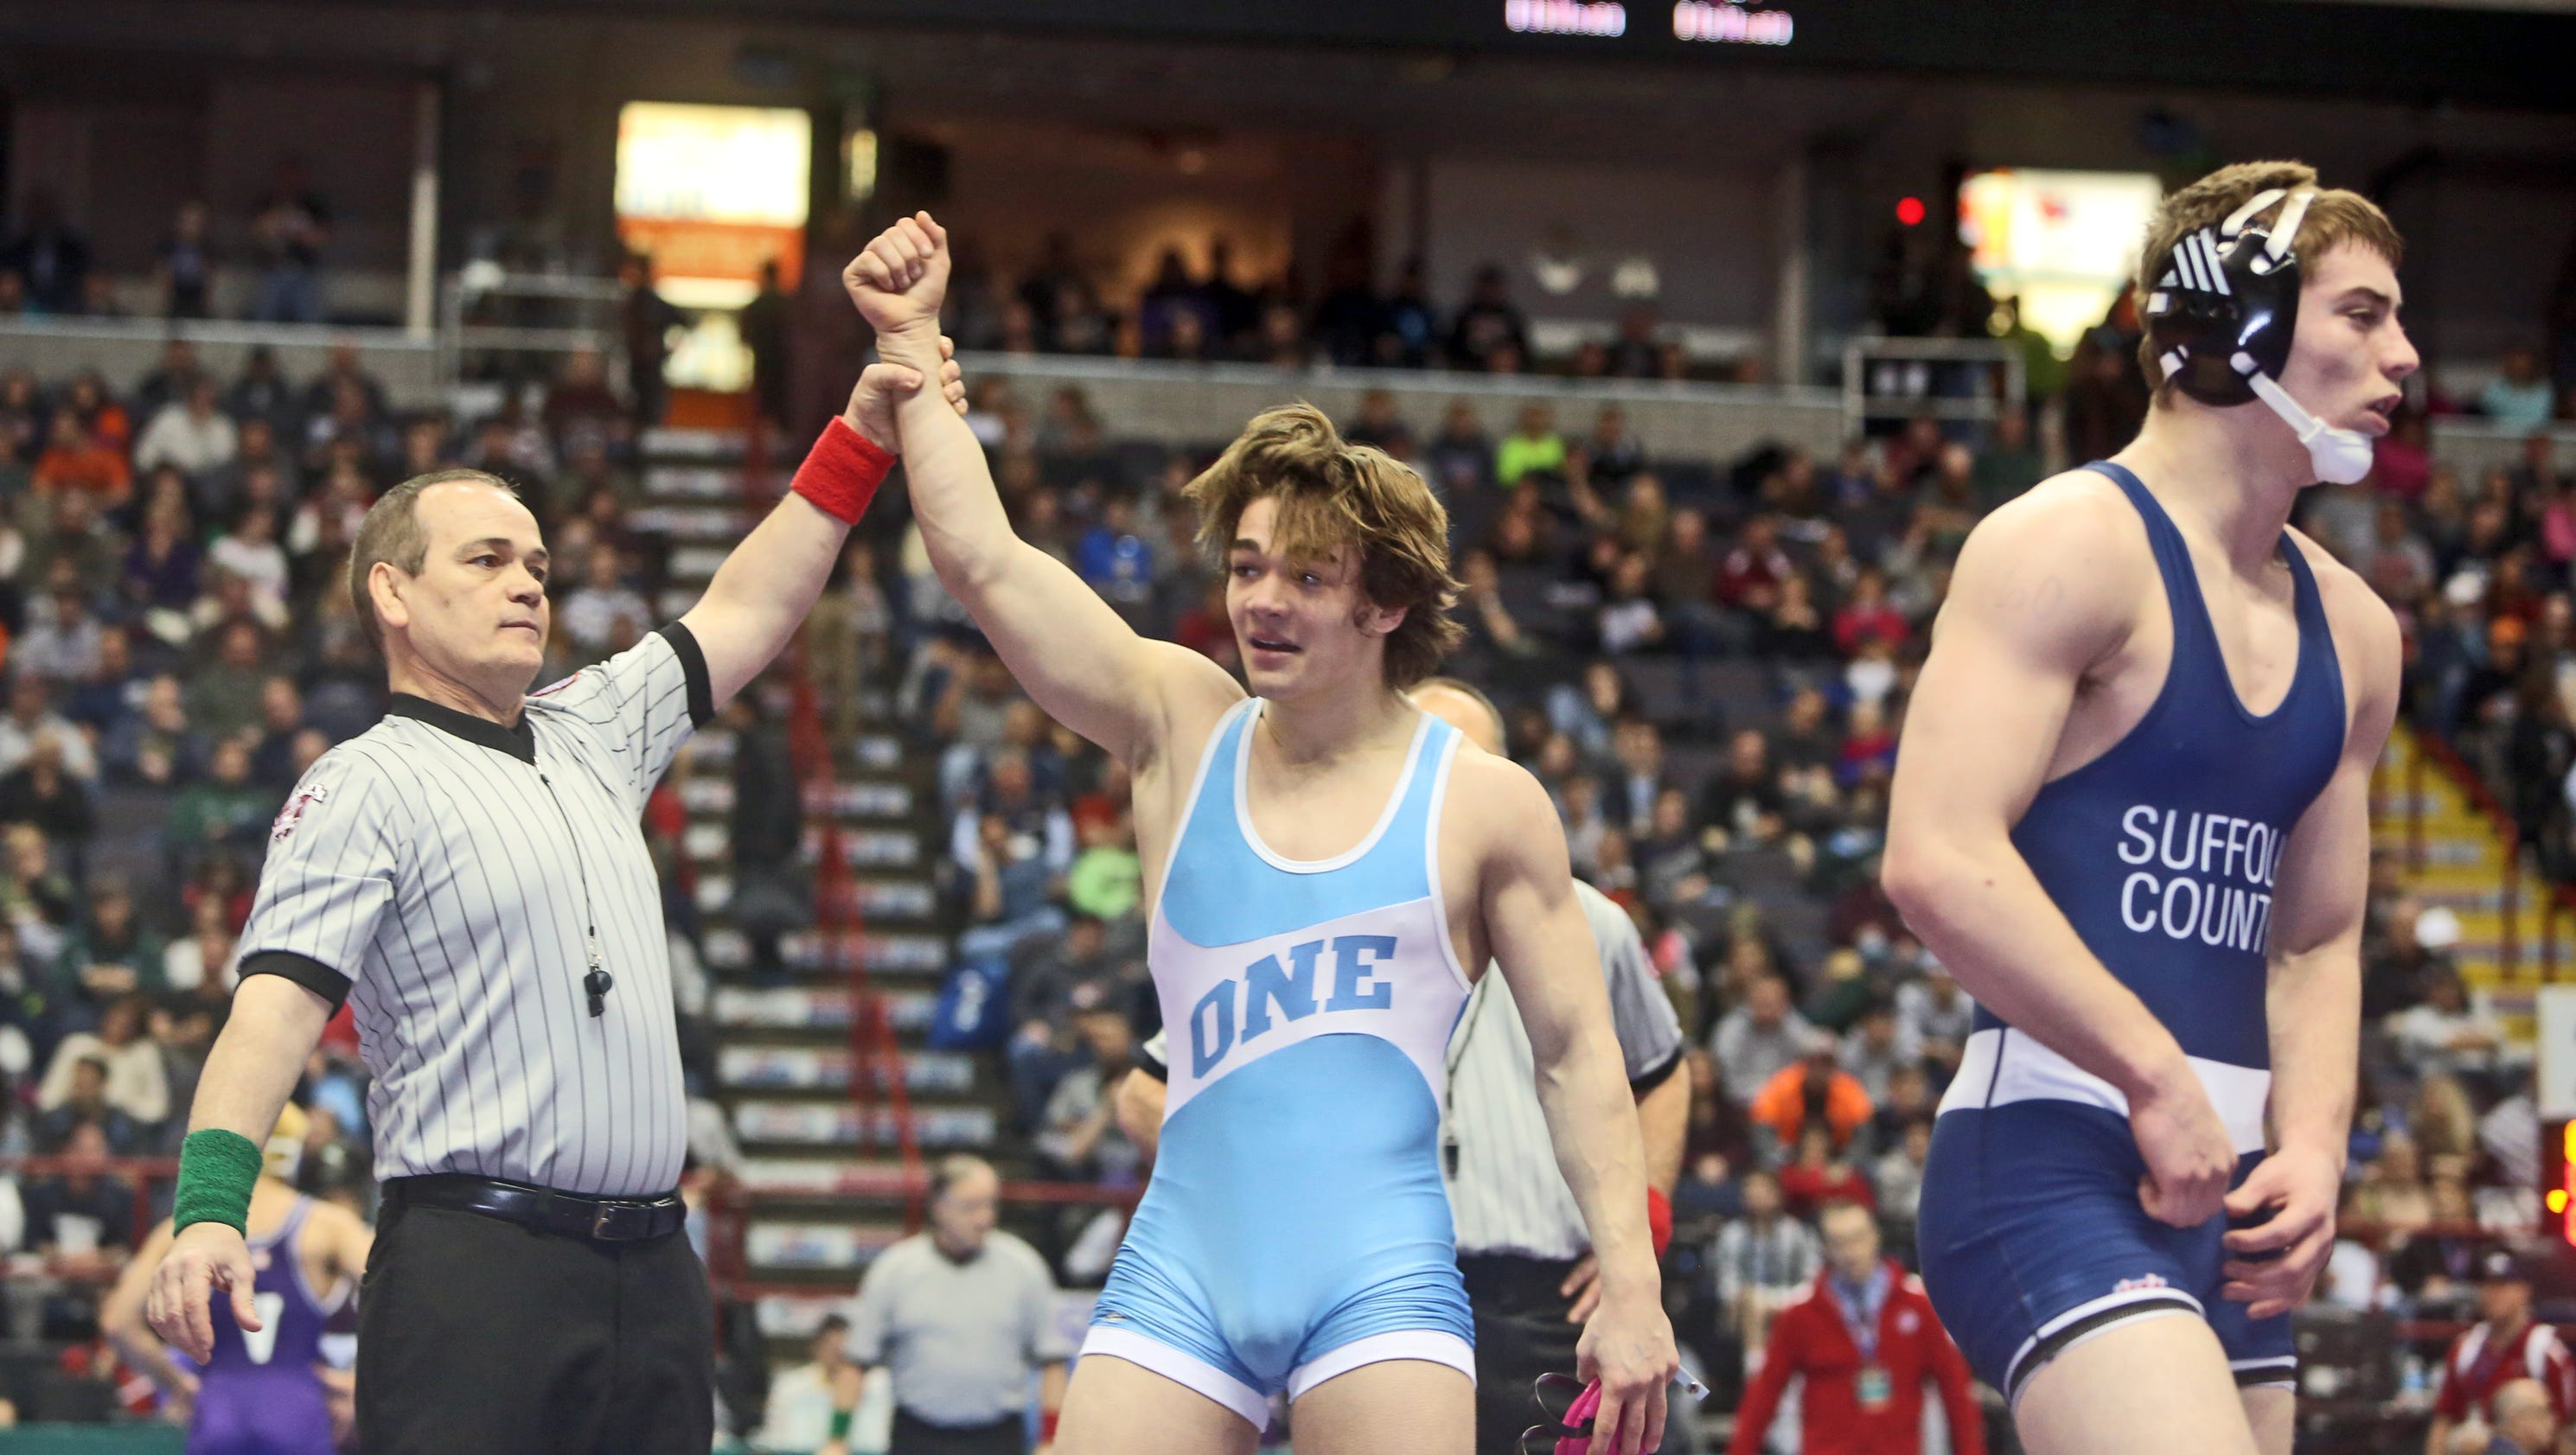 Semifinal round of the New York State Wrestling Championships